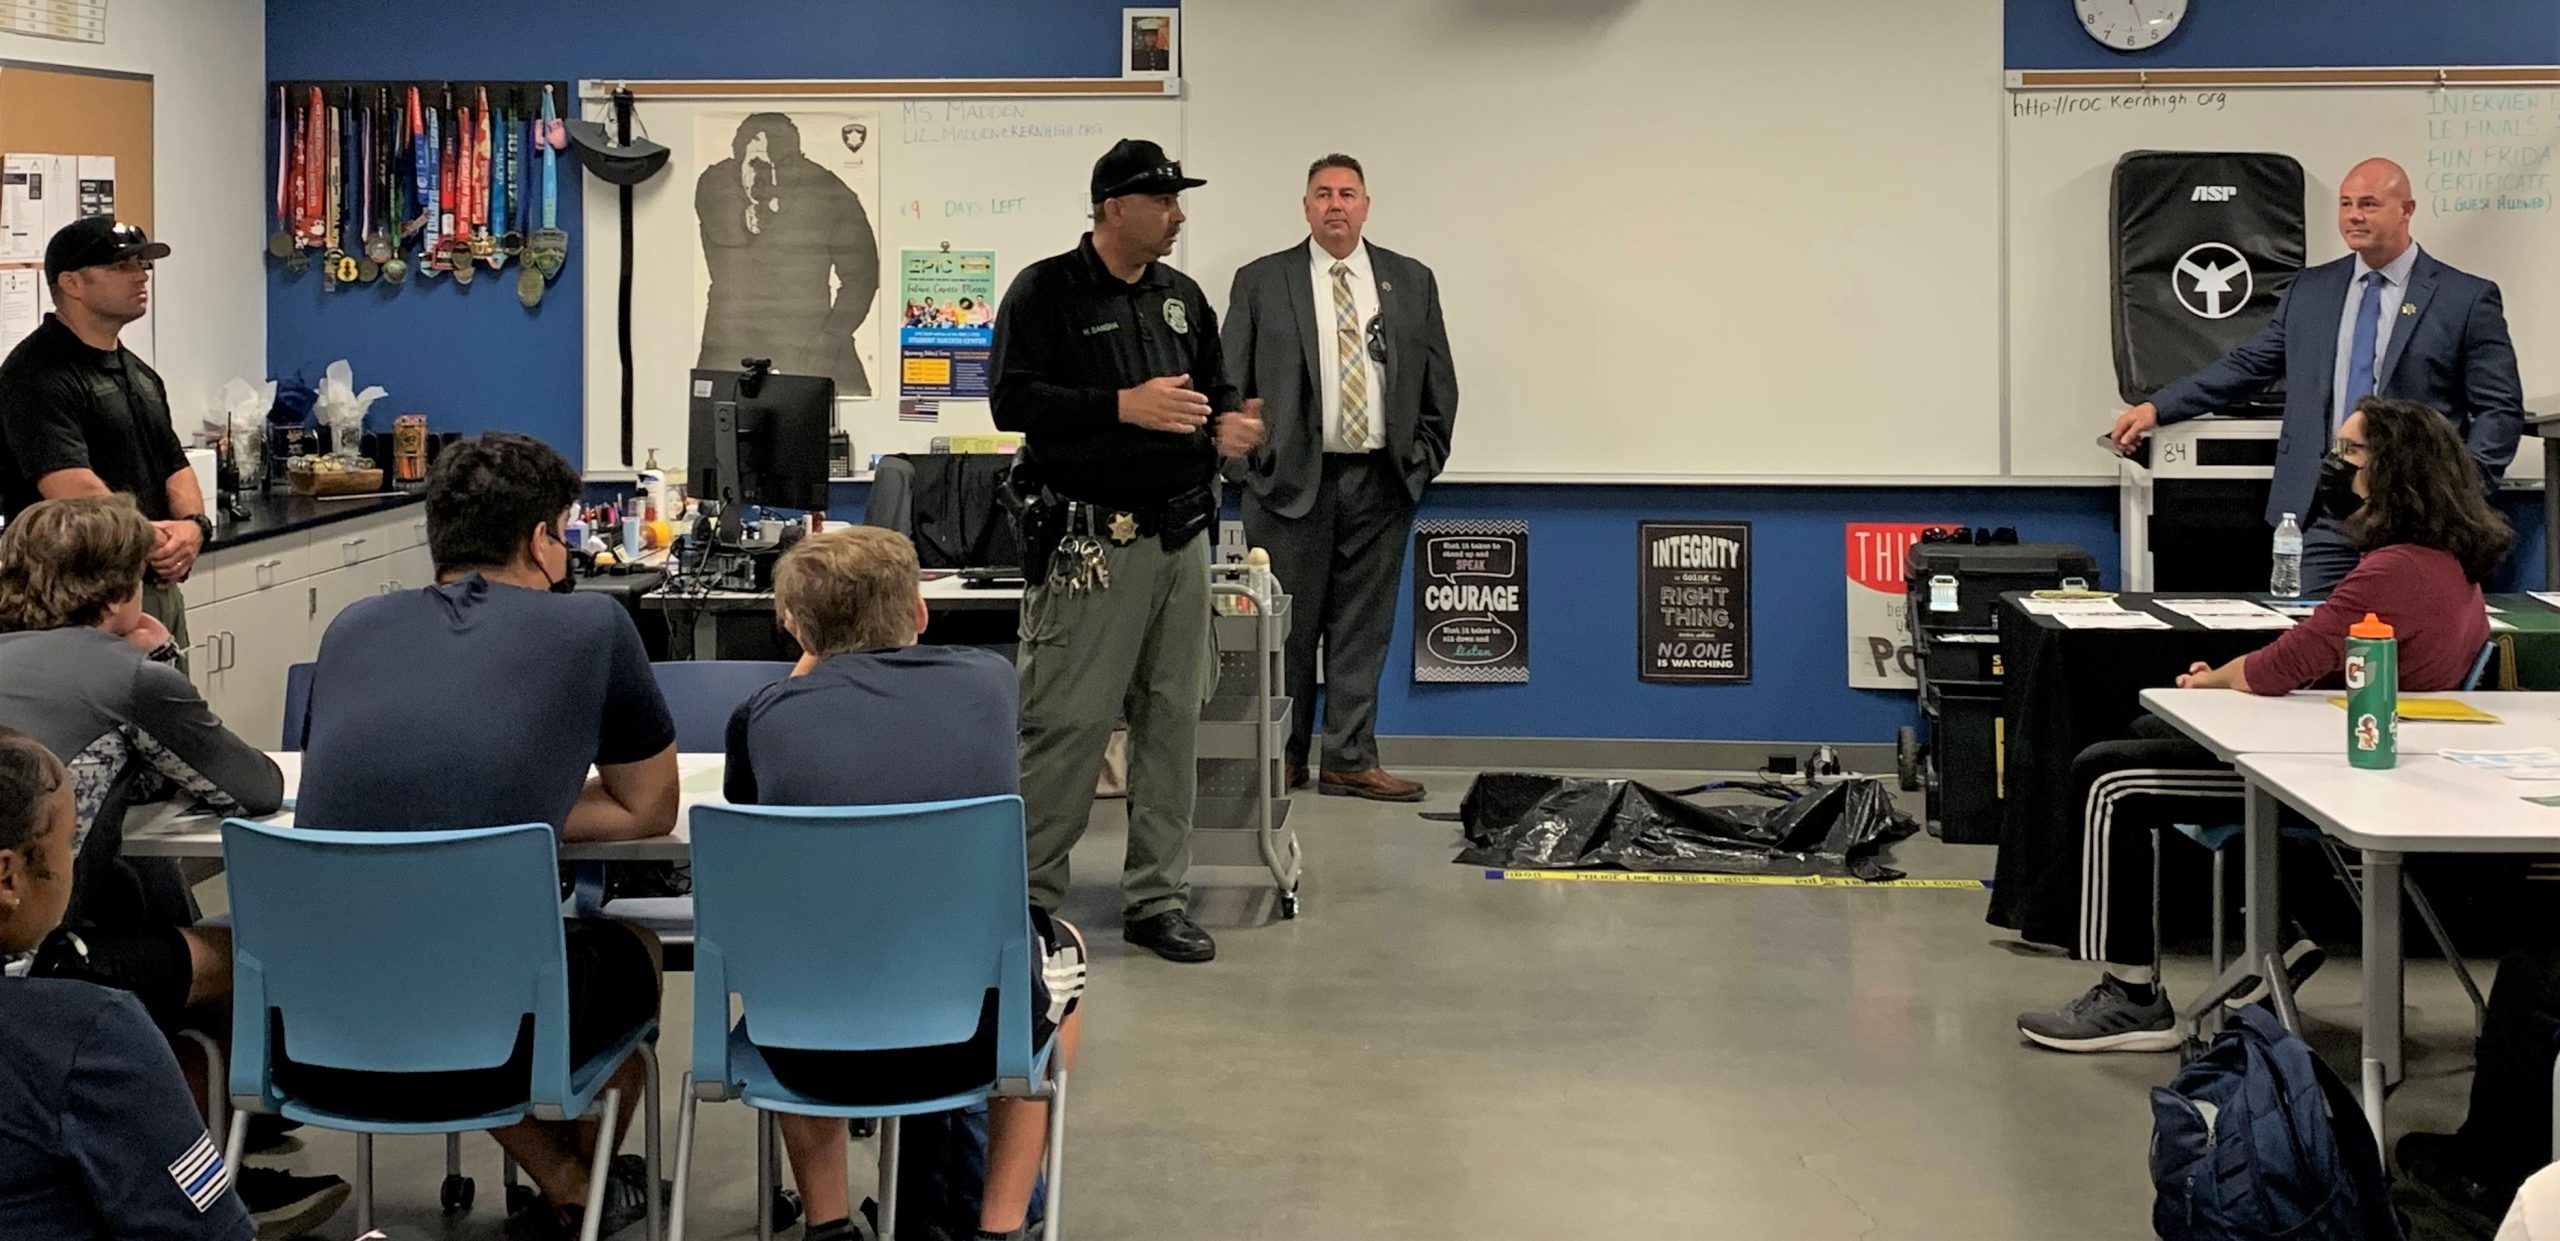 Officer and warden stand in front of class.